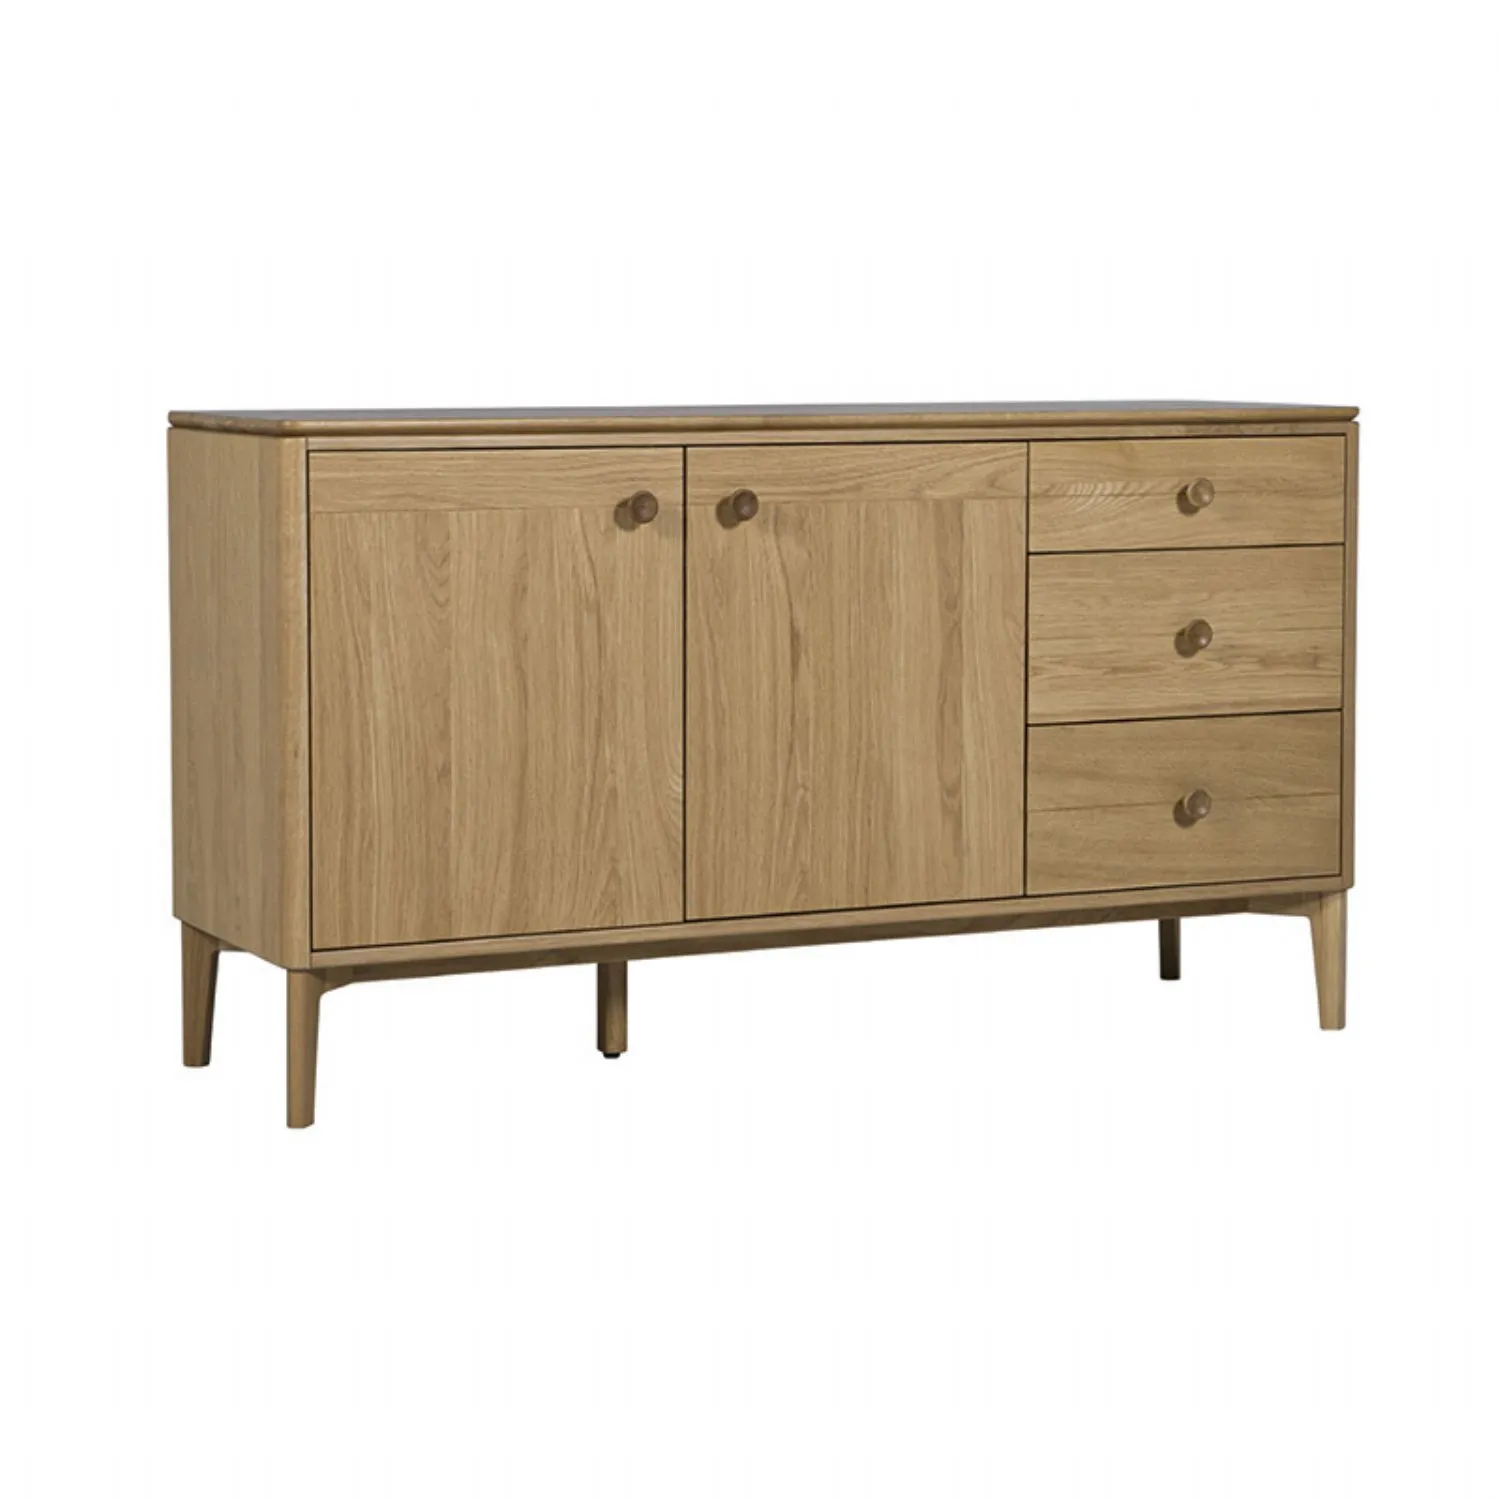 Natural Oak Large 2 Door Sideboard with 3 Drawers